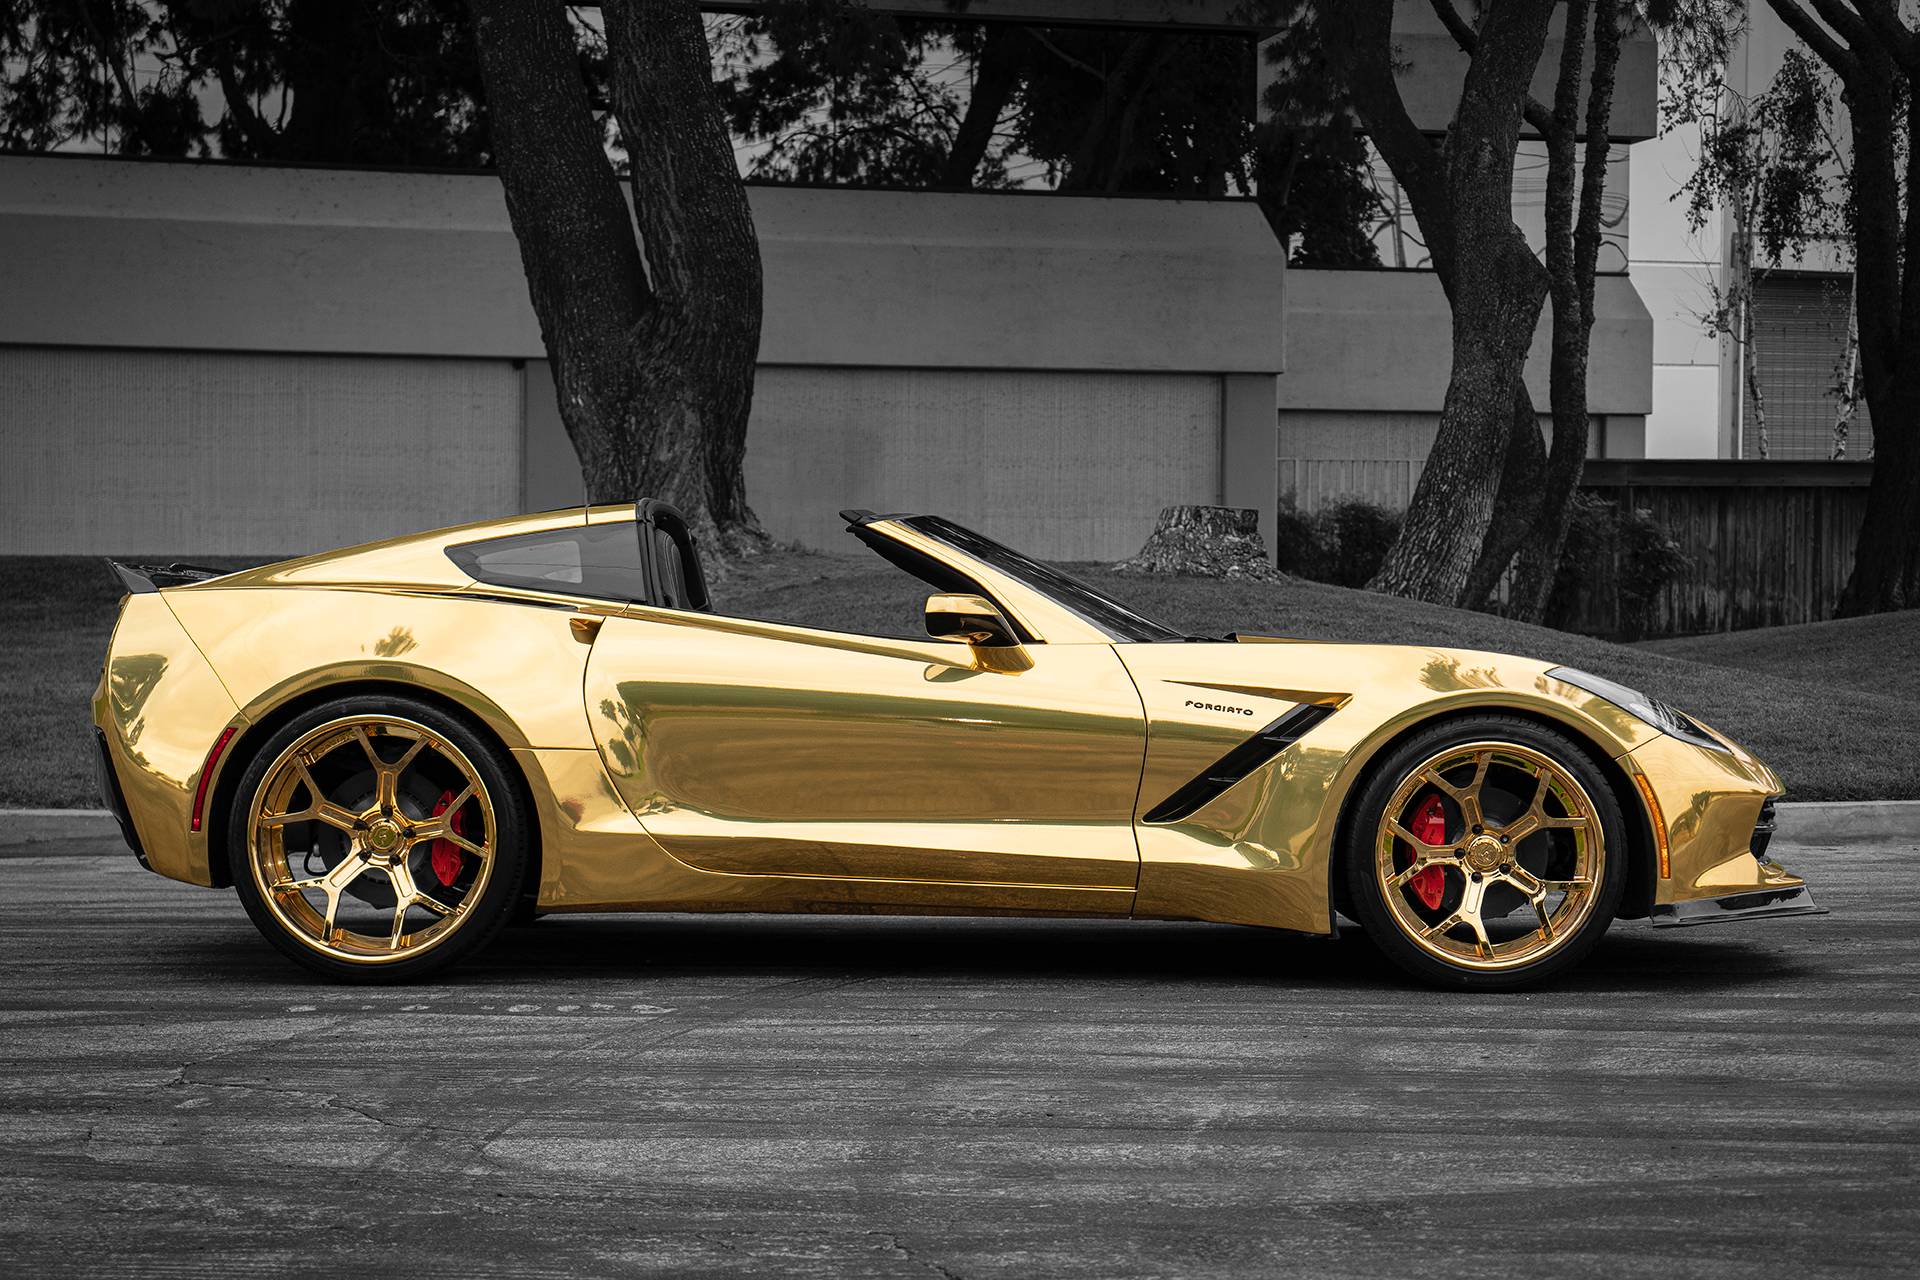 Widebody Corvette C7 With Gold Wrap And Huge Forgiato Rims Is Bling Overdos...